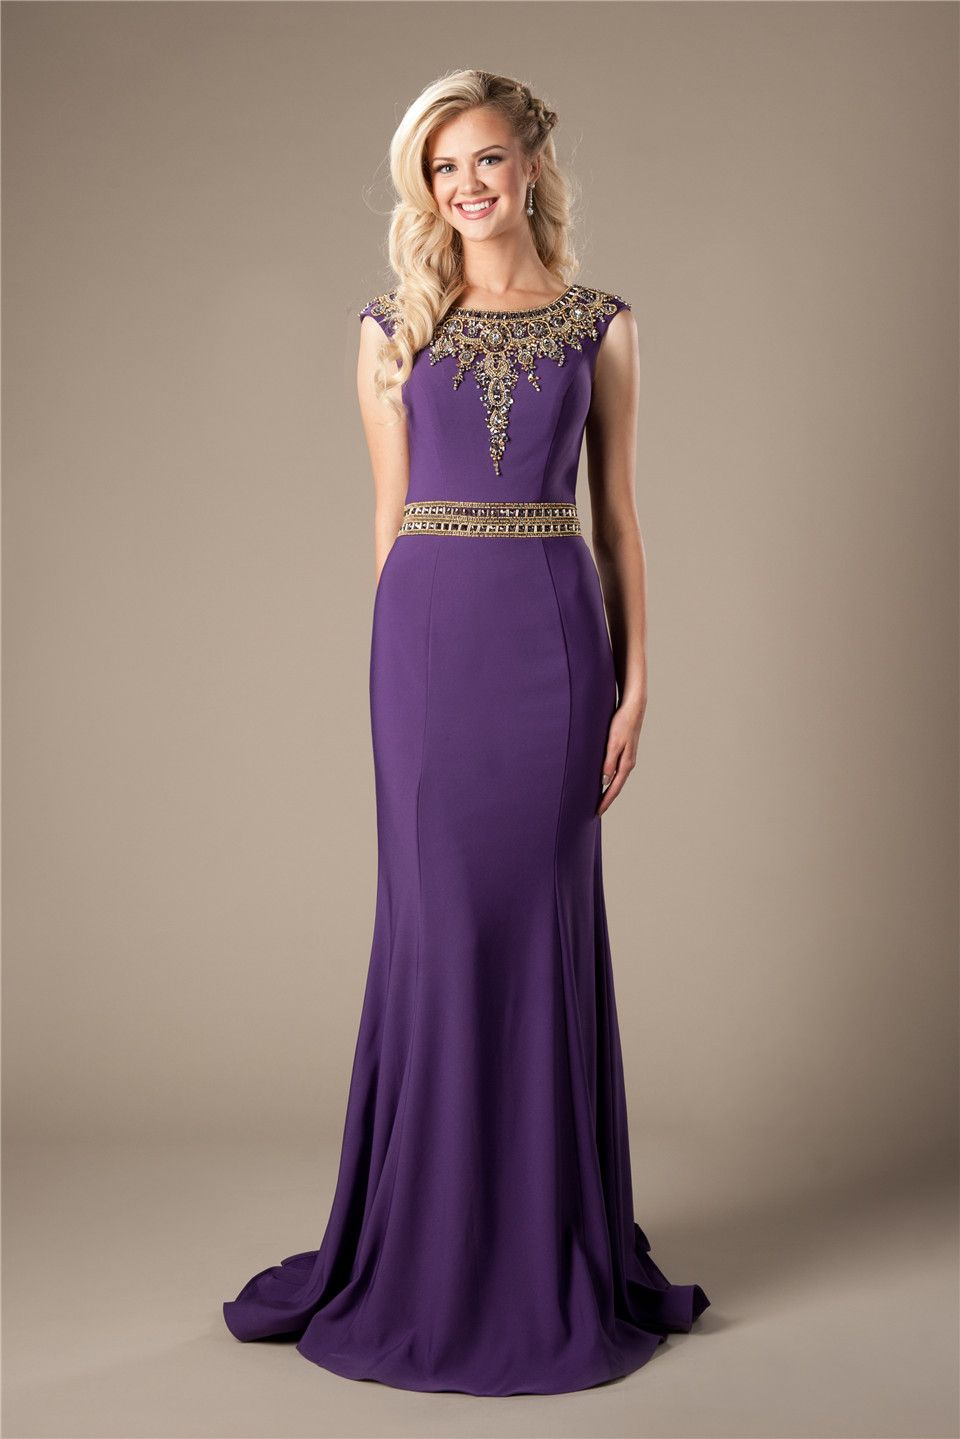 stylish evening gowns